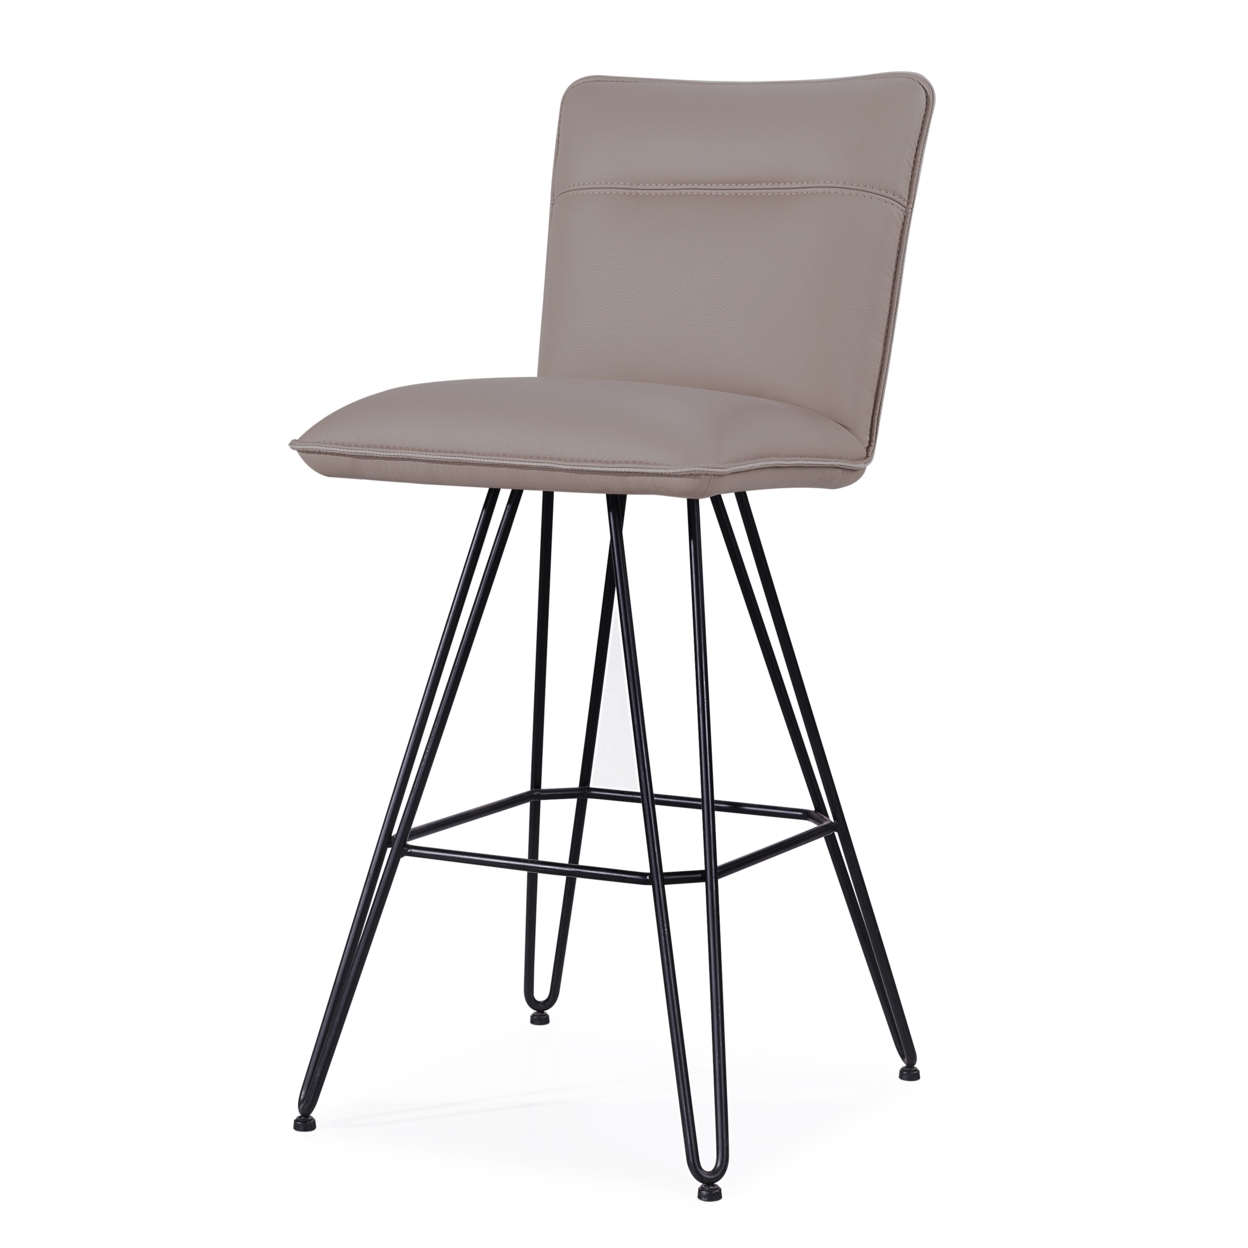 Metal Leather Upholstered Bar Height Stool With Hairpin Style Legs Set Of 2, Taupe And Black- Saltoro Sherpi